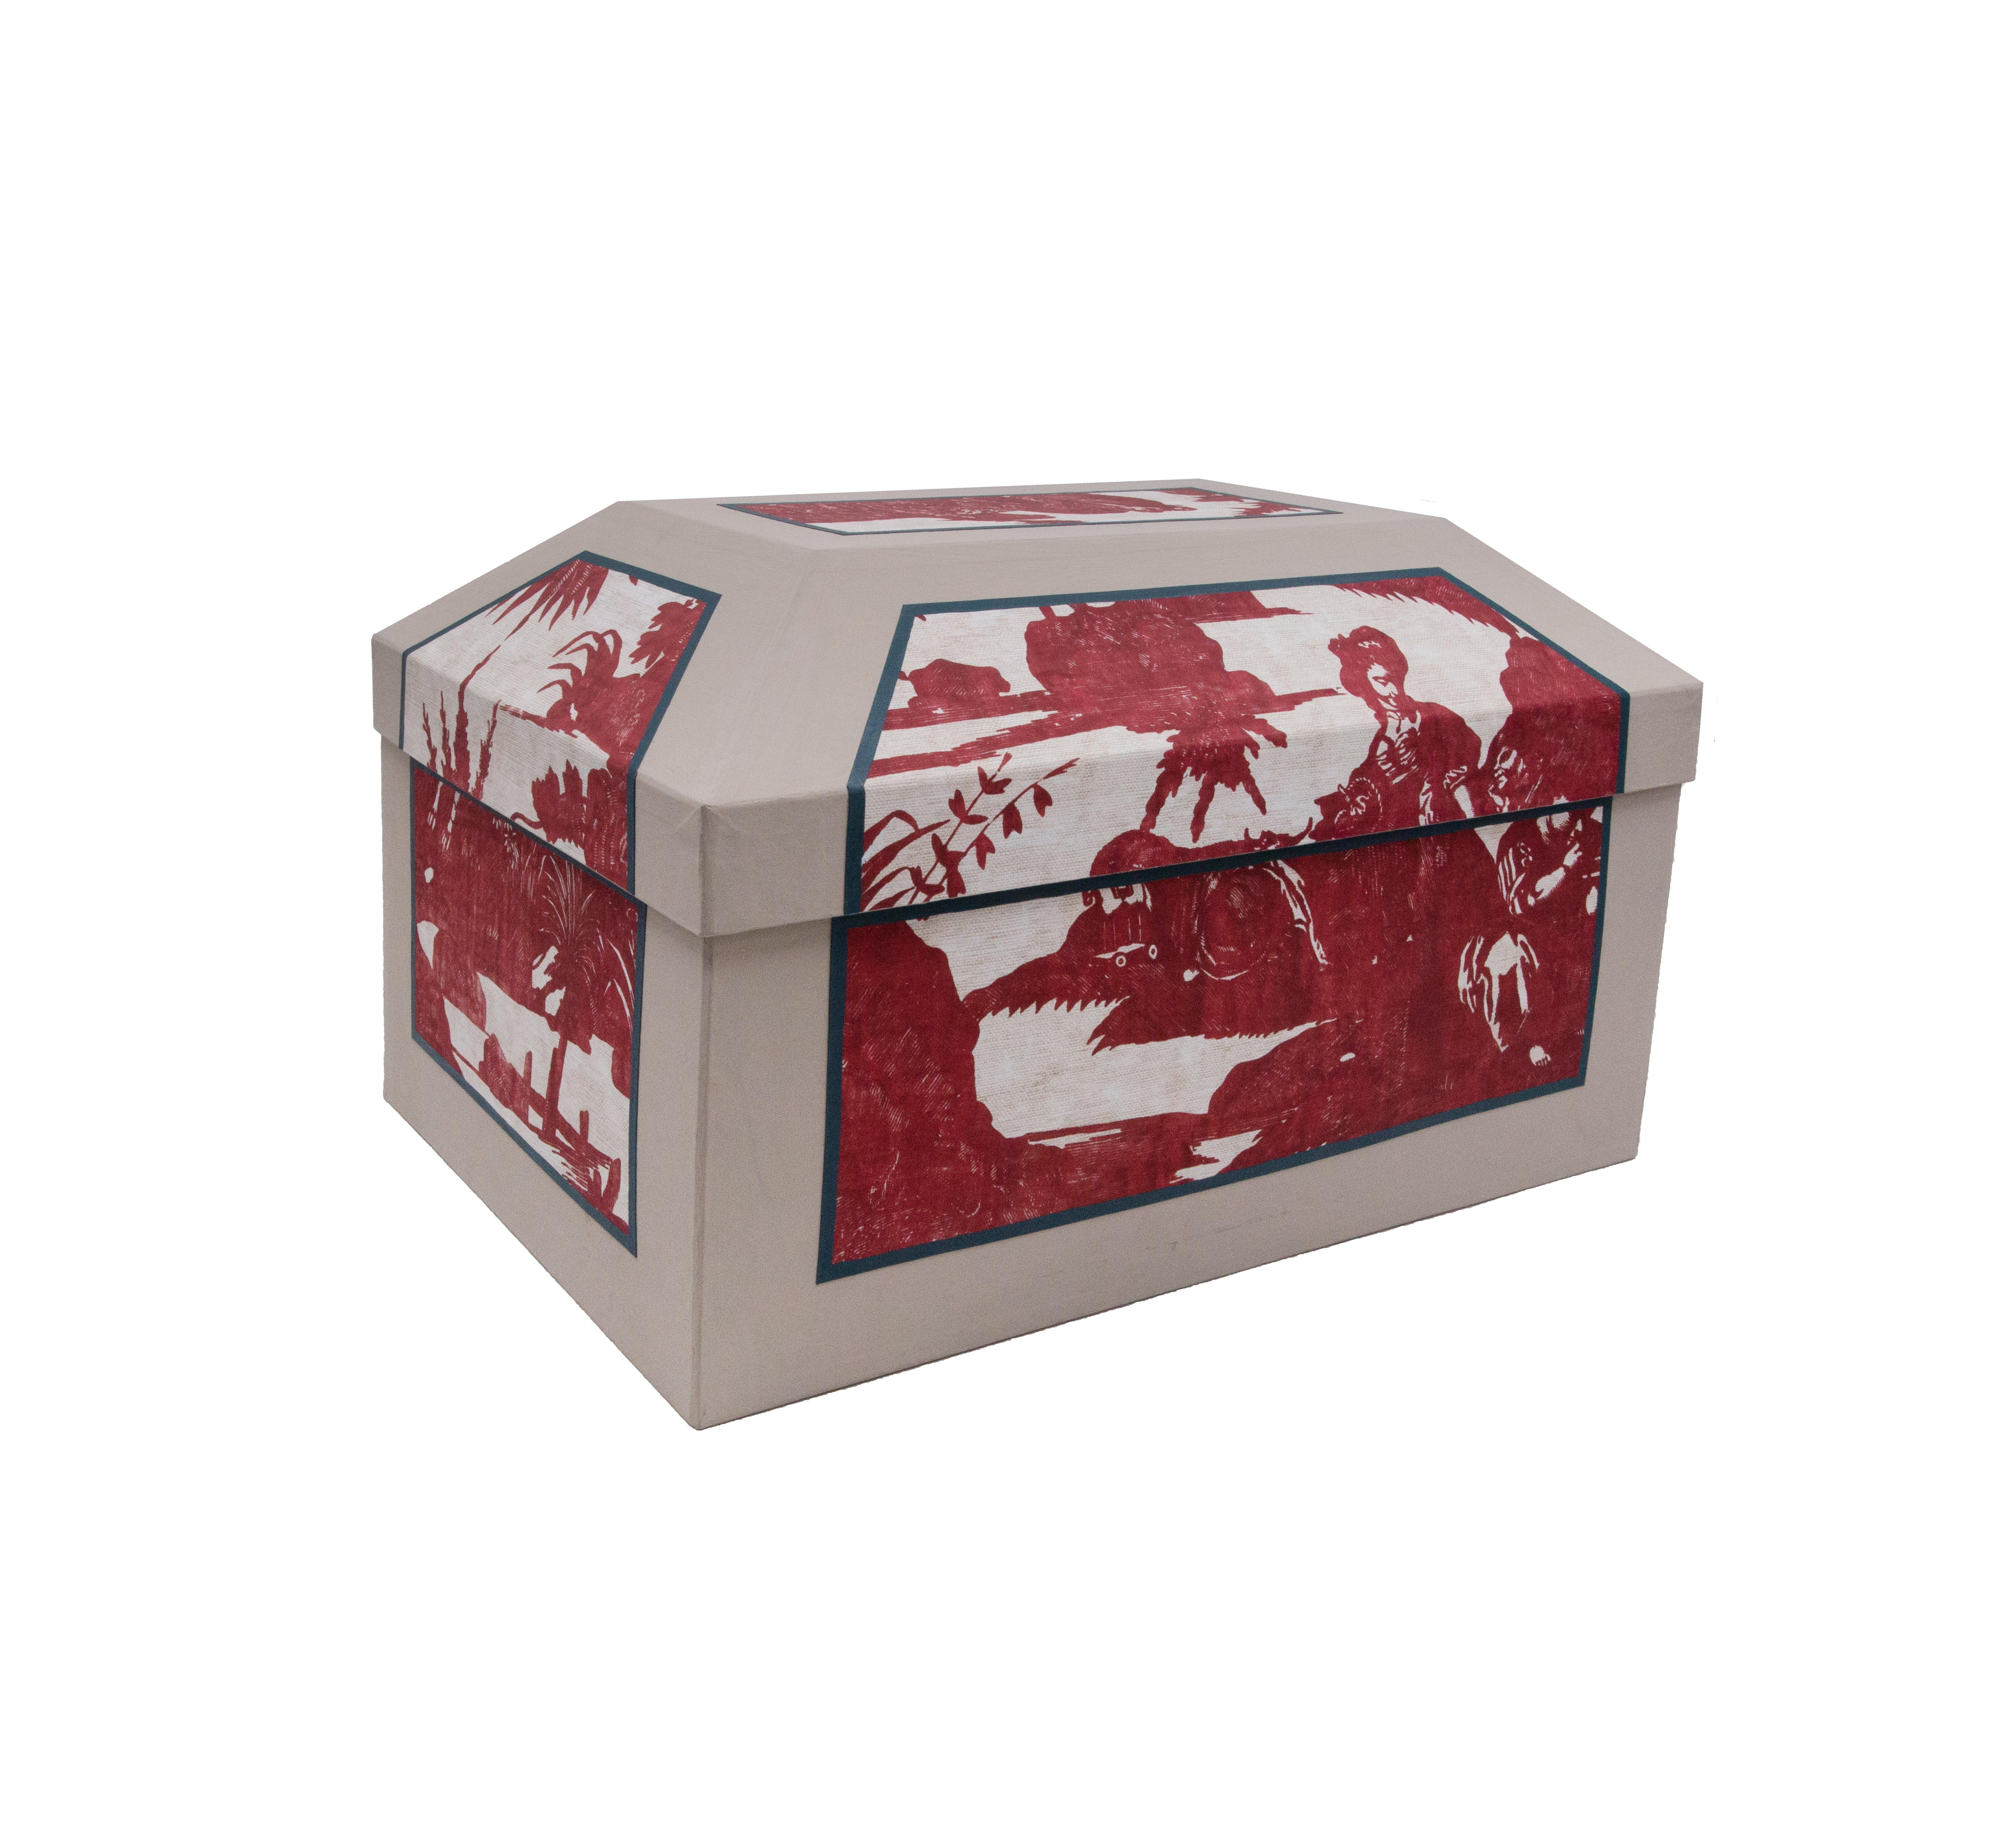 French Provincial Handmade Papier-mâché Wedding Box - Made in France - Red Toile de Jouy print For Sale